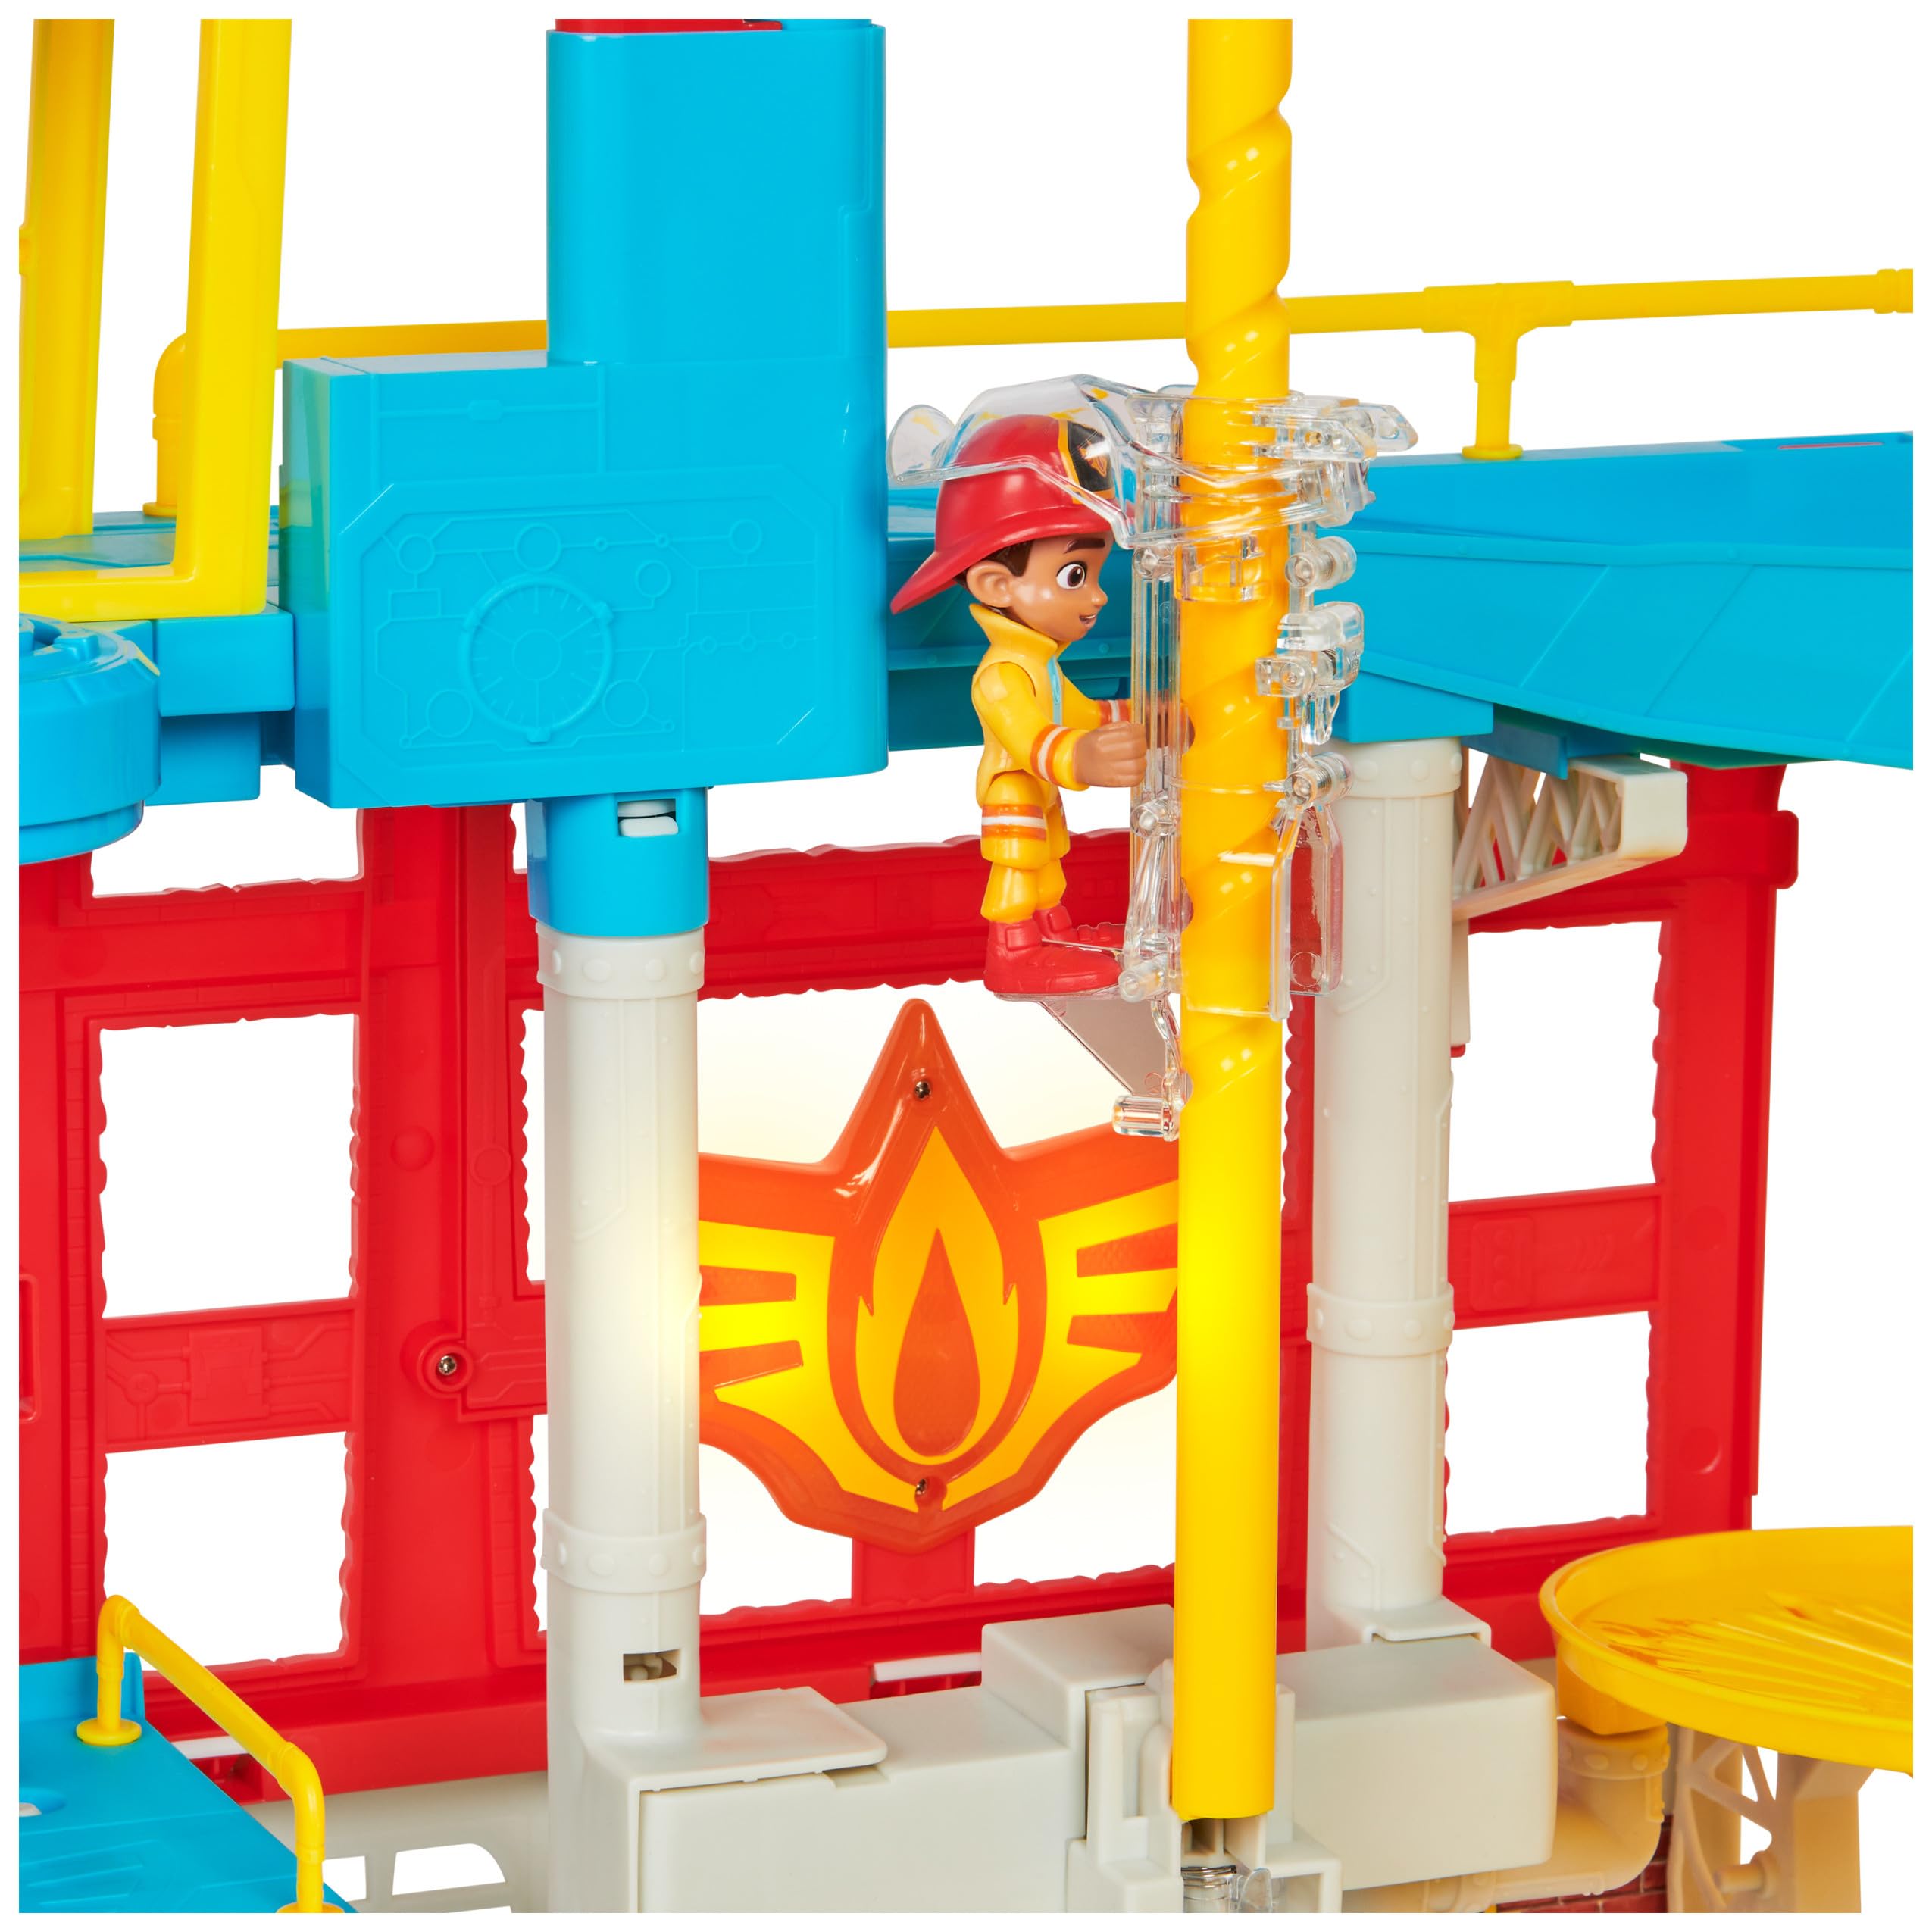 Disney Junior Firebuds HQ Playset with Lights, Sounds, Fire Truck Toy, Action Figure and Vehicle Launcher, Kids Toys for Boys and Girls Ages 3 and Up